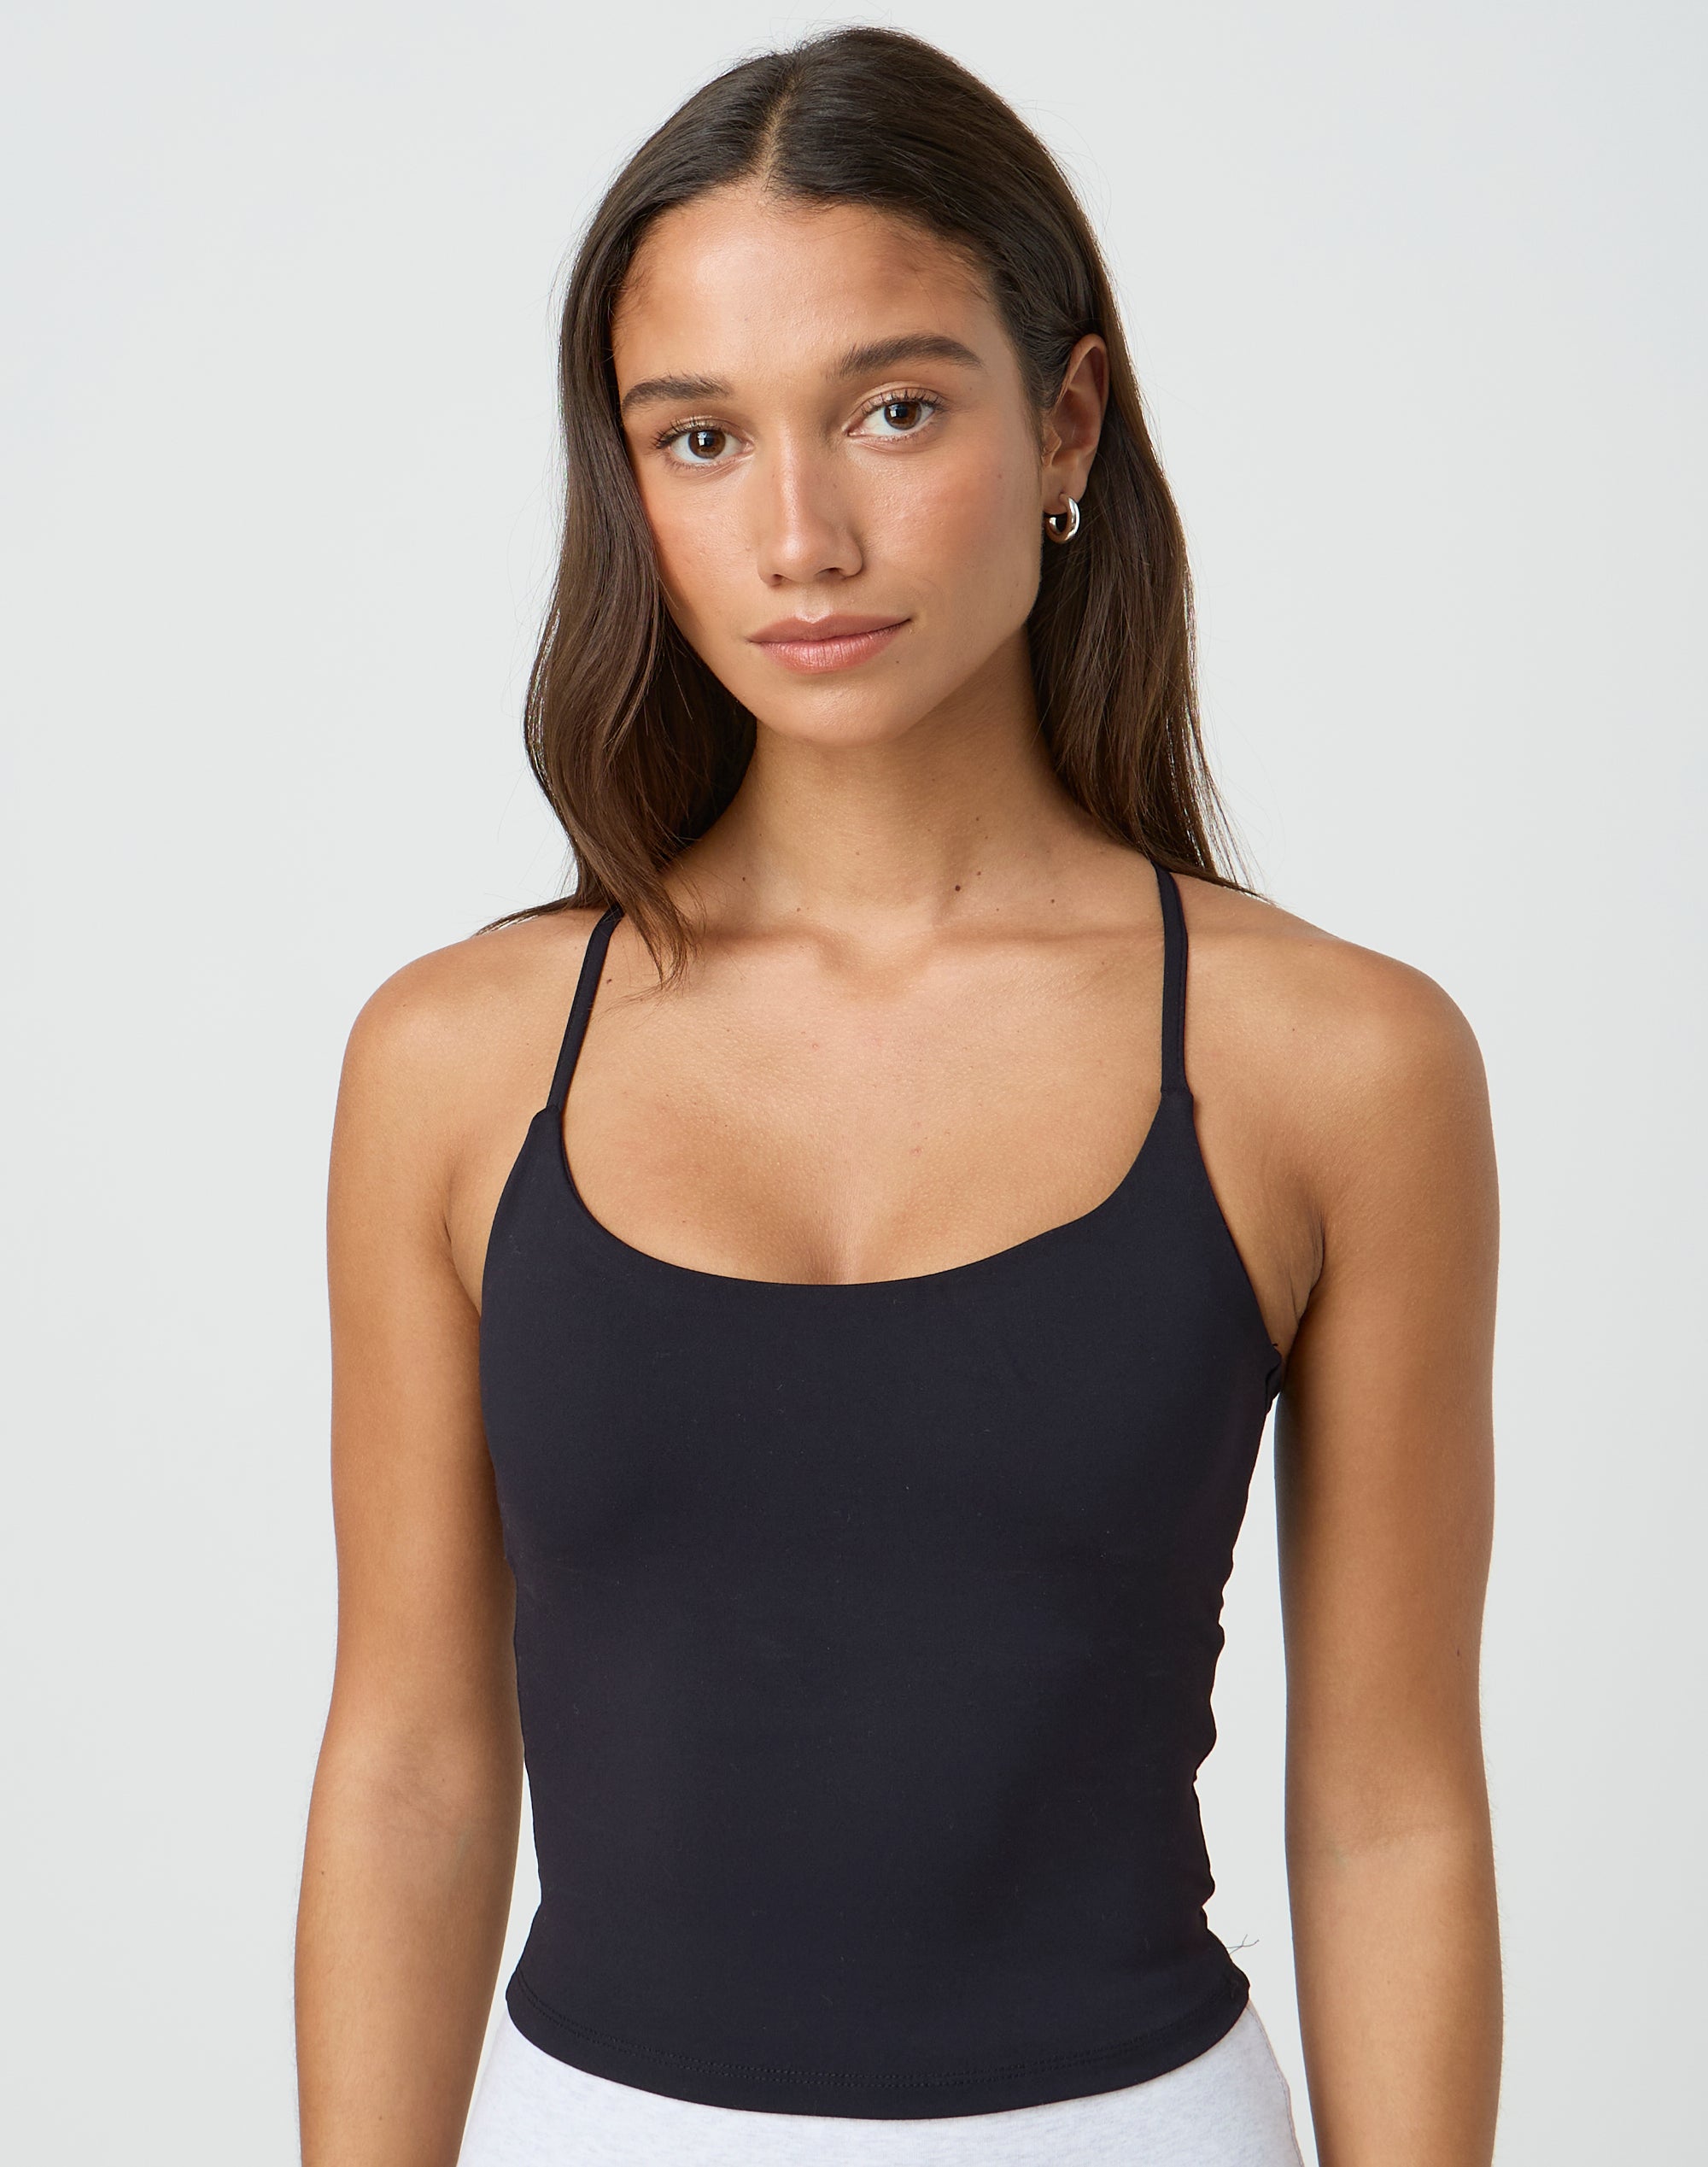 https://www.glassons.com/content/products/co-simone-cross-back-active-tank-black-front-tv129235but.jpg